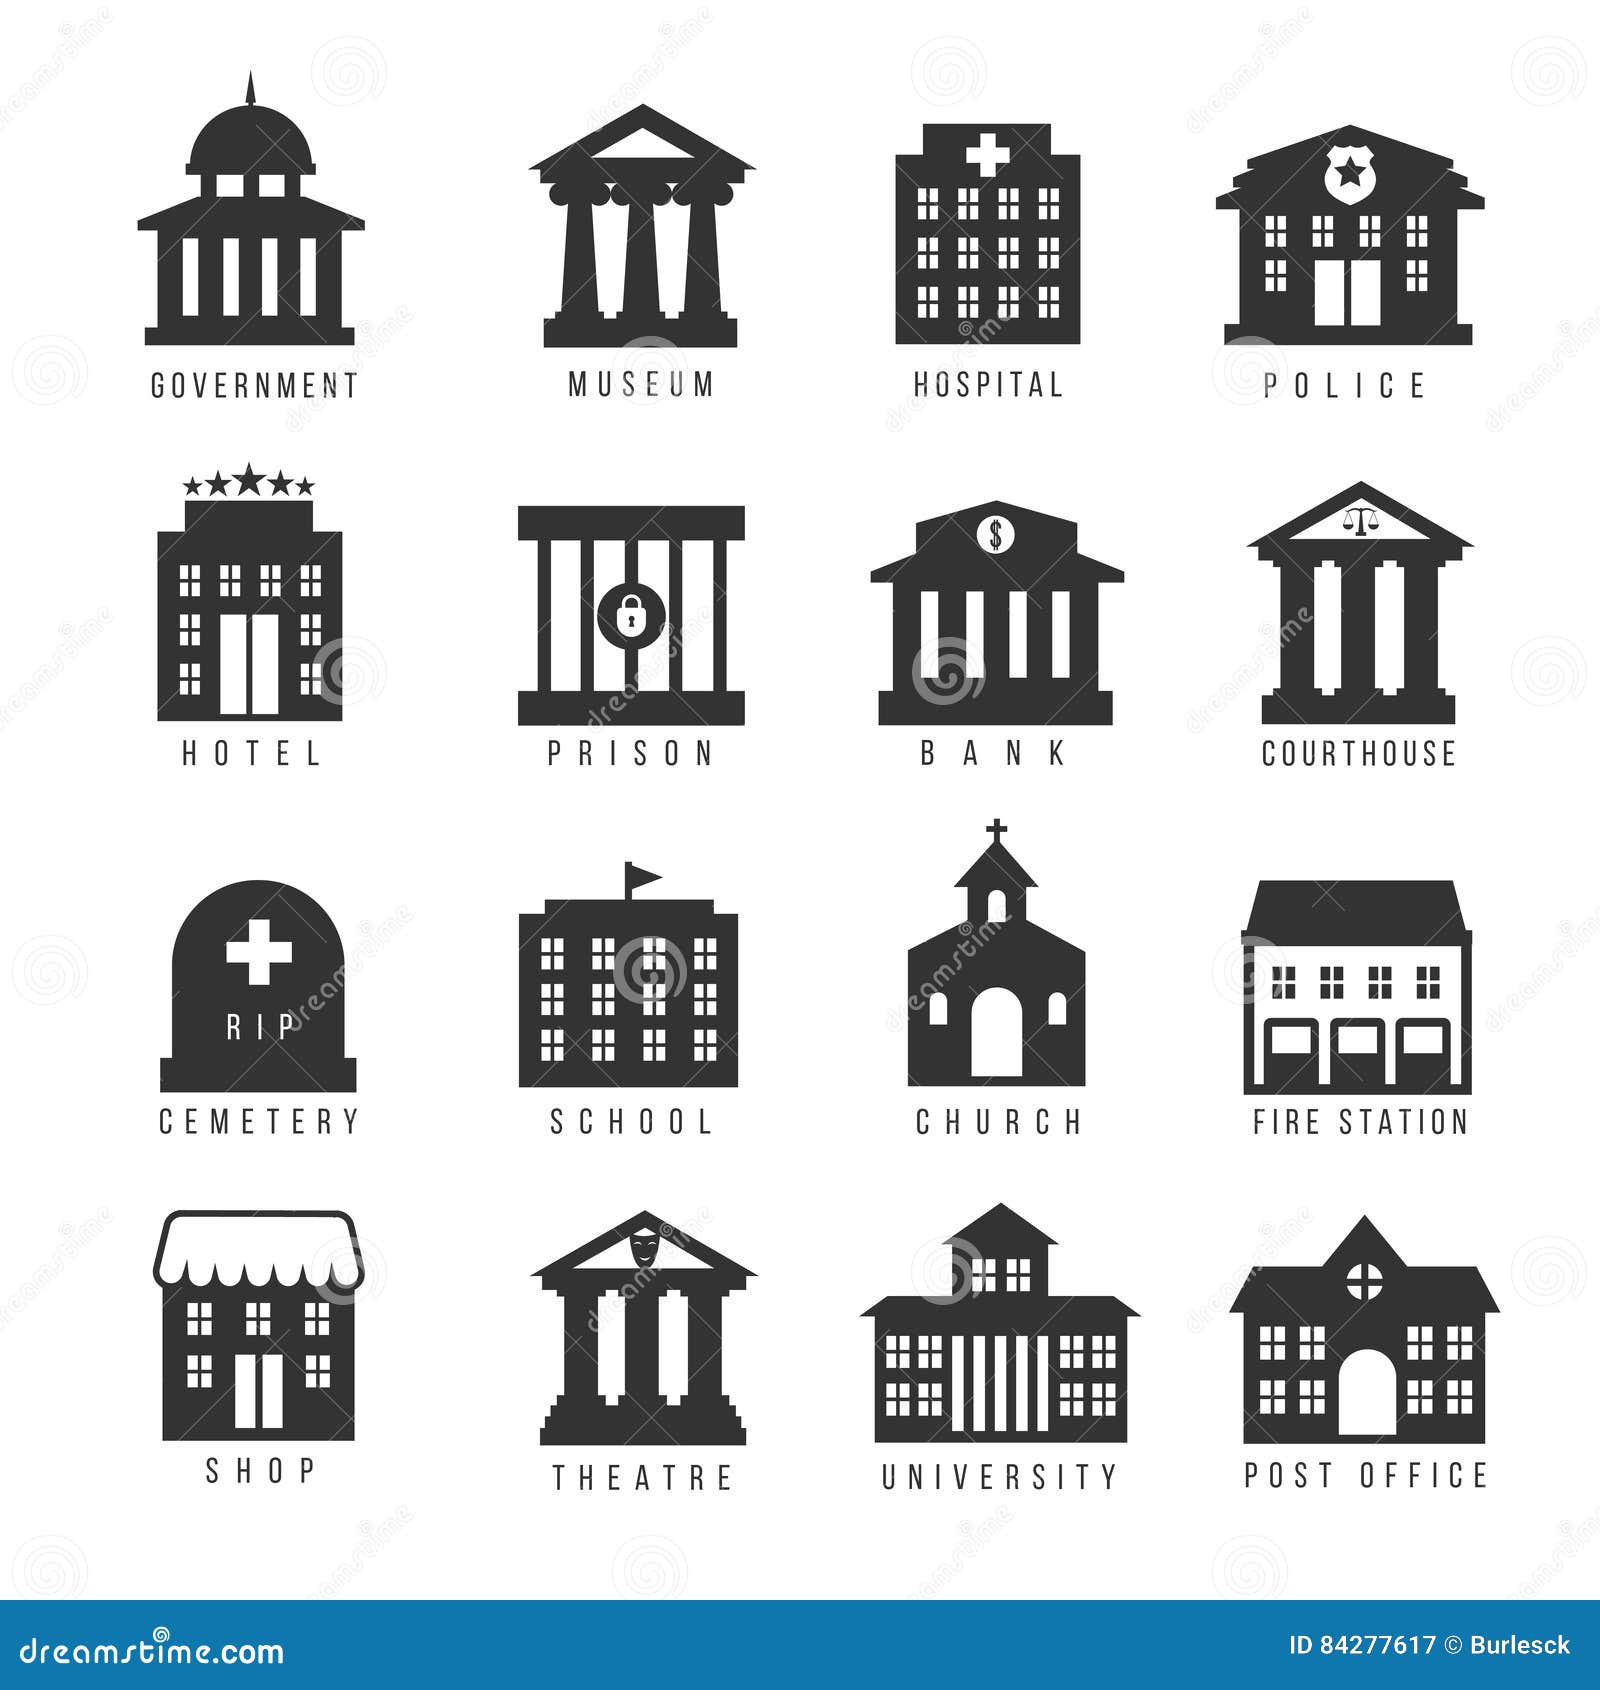 government building icon set.  buildings like university, police office and city hall, hospital museum